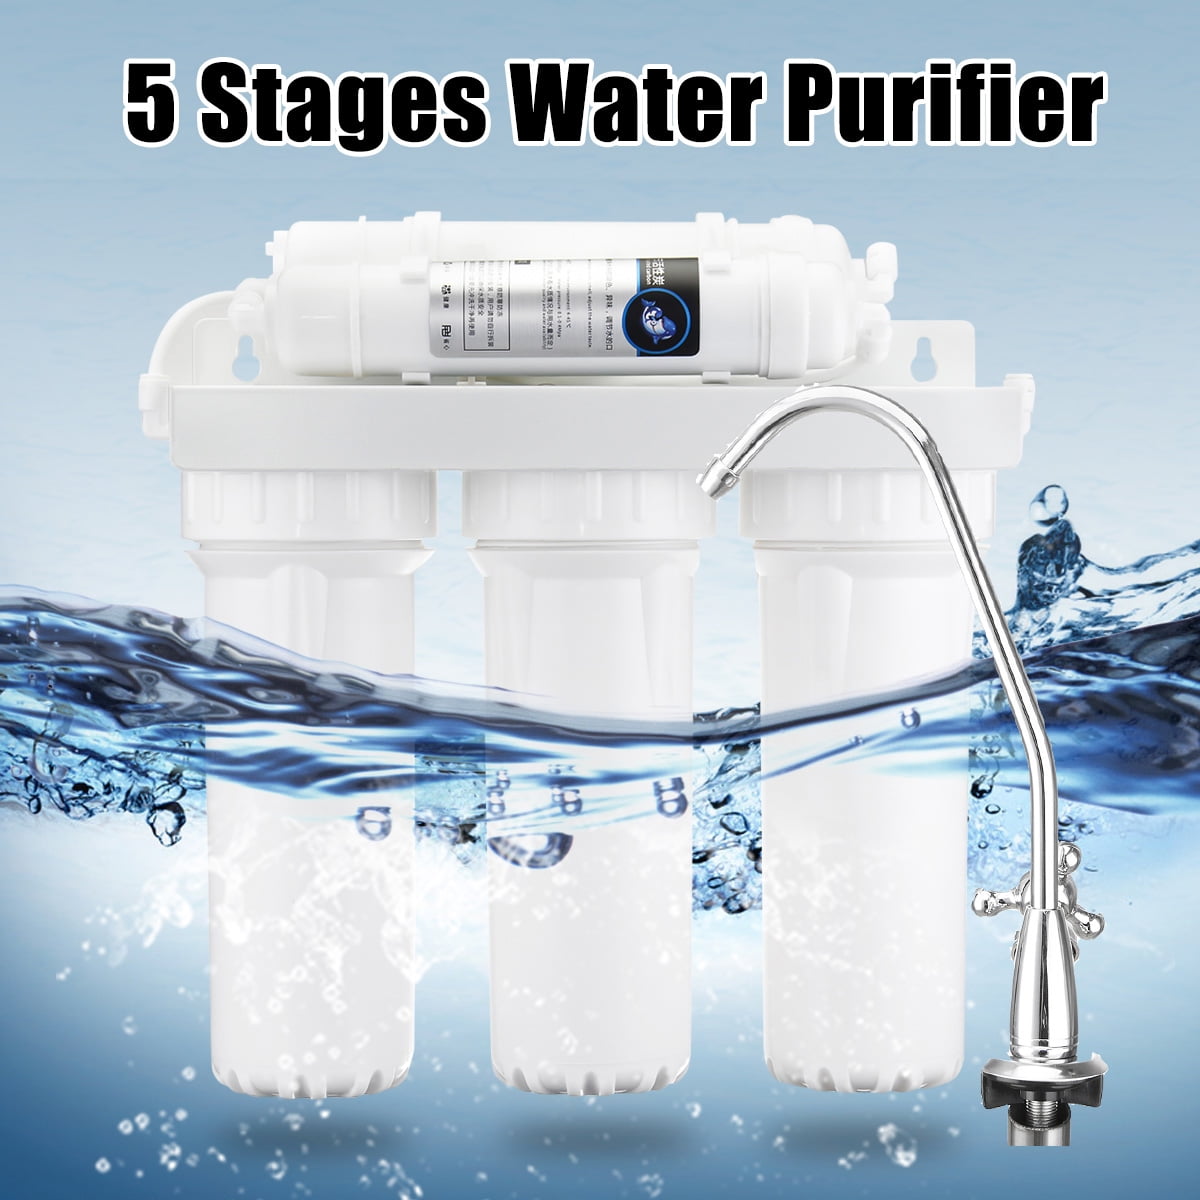 Faucet Water Filter Multi-Stage Advanced Faucet Water Filter System with Transparent Visual Window Removes Chlorine Viruses Chemicals Pesticides DXMCC Tap Water Purifier Fluoride Bacteria 